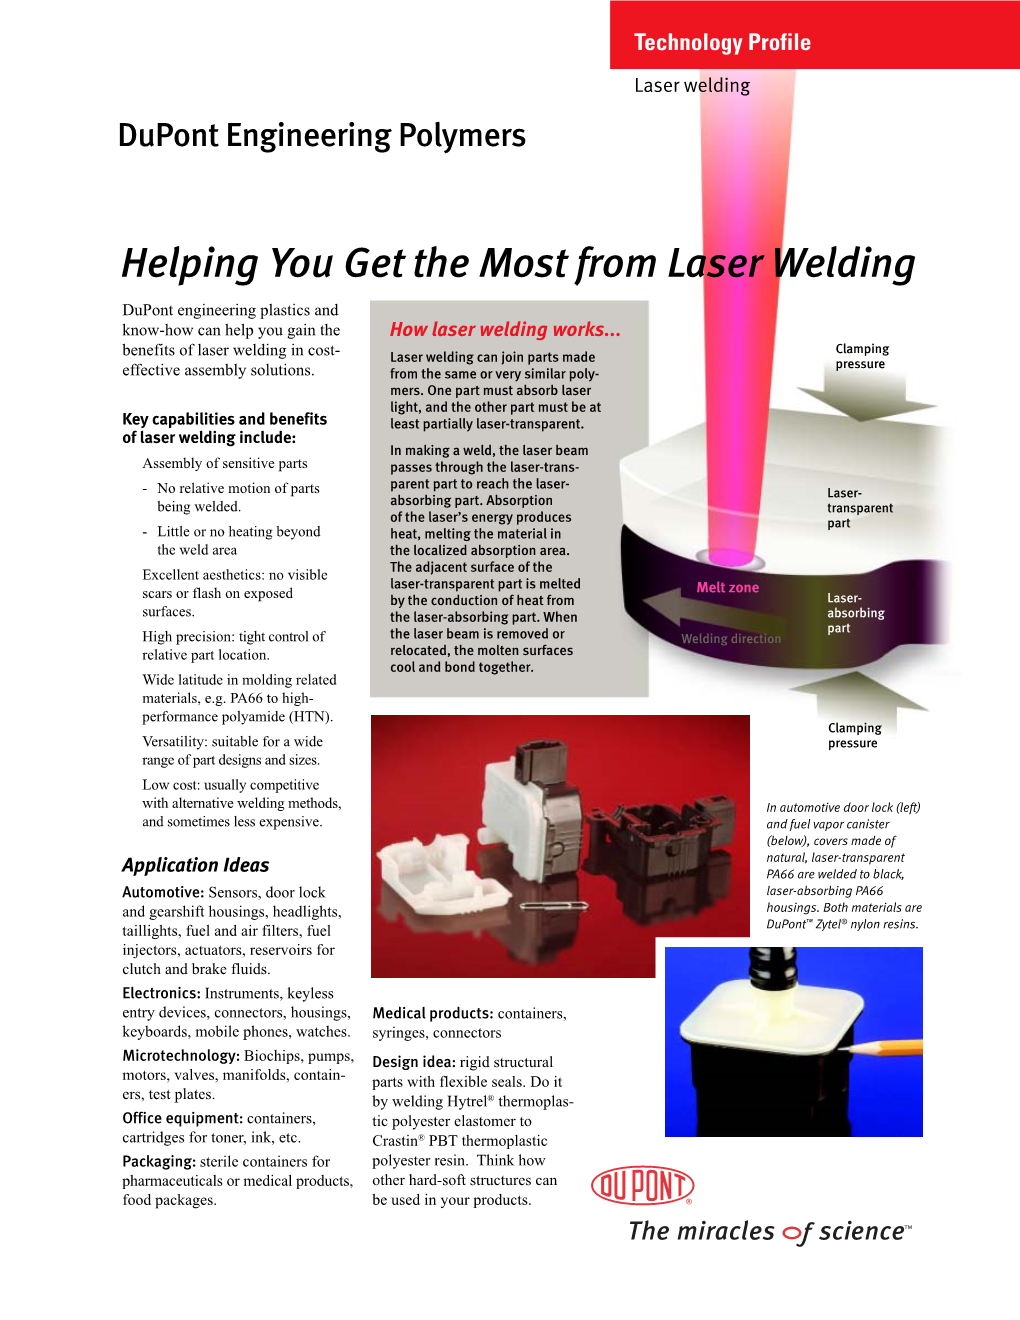 Get the Most from Laser Welding Technology